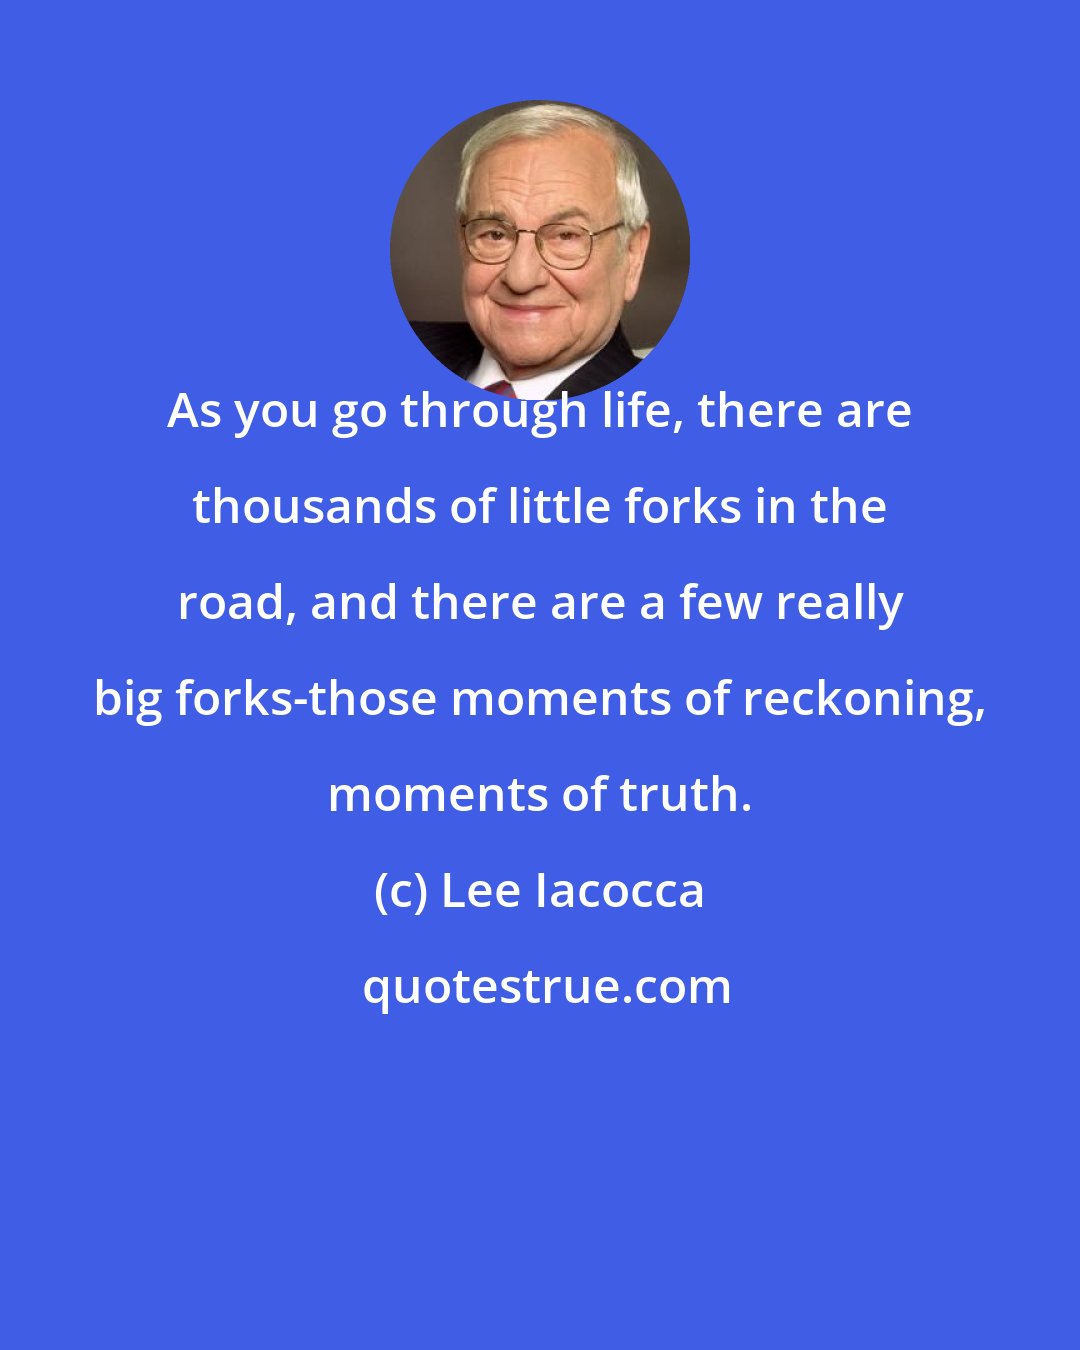 Lee Iacocca: As you go through life, there are thousands of little forks in the road, and there are a few really big forks-those moments of reckoning, moments of truth.